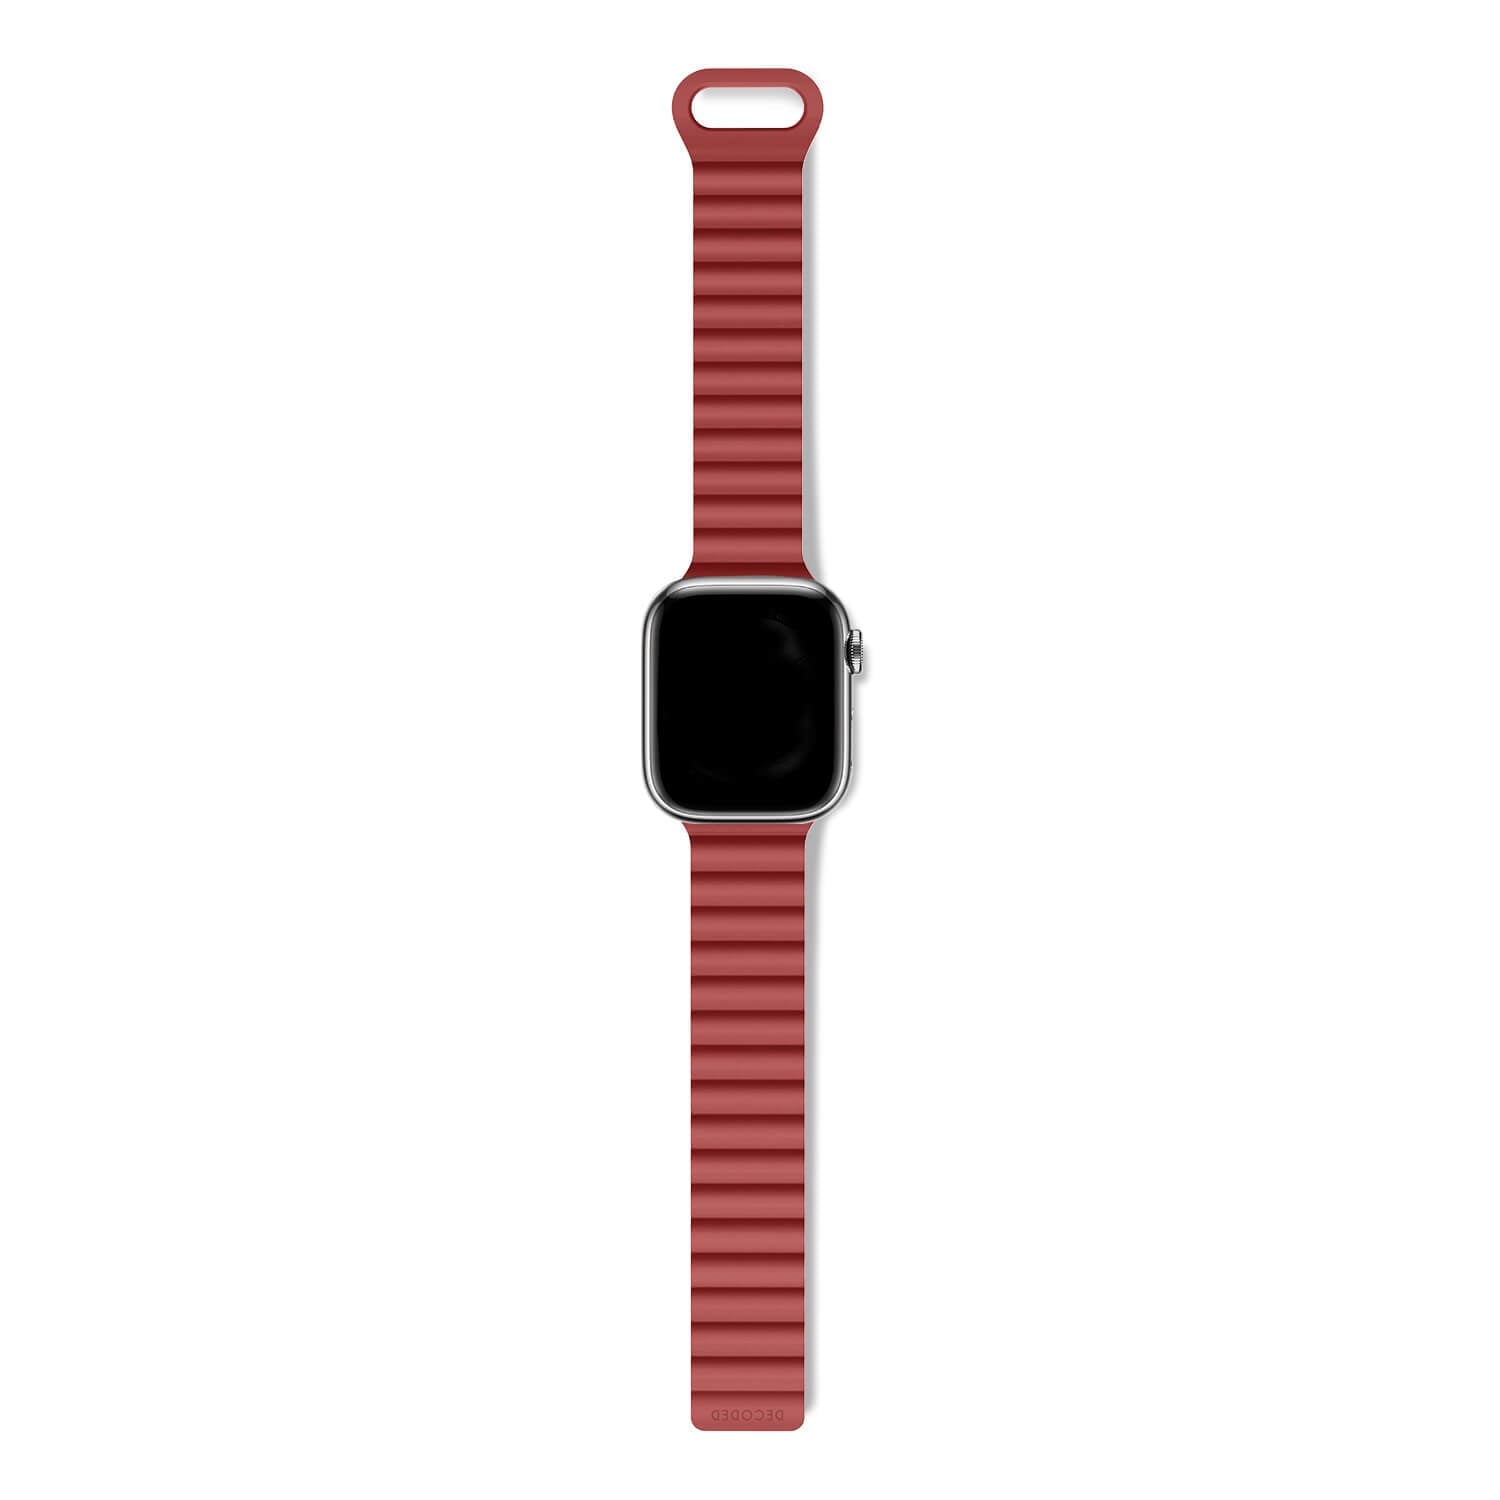 Silicone Traction Loop Strap Apple Watch 40mm Astro Dust